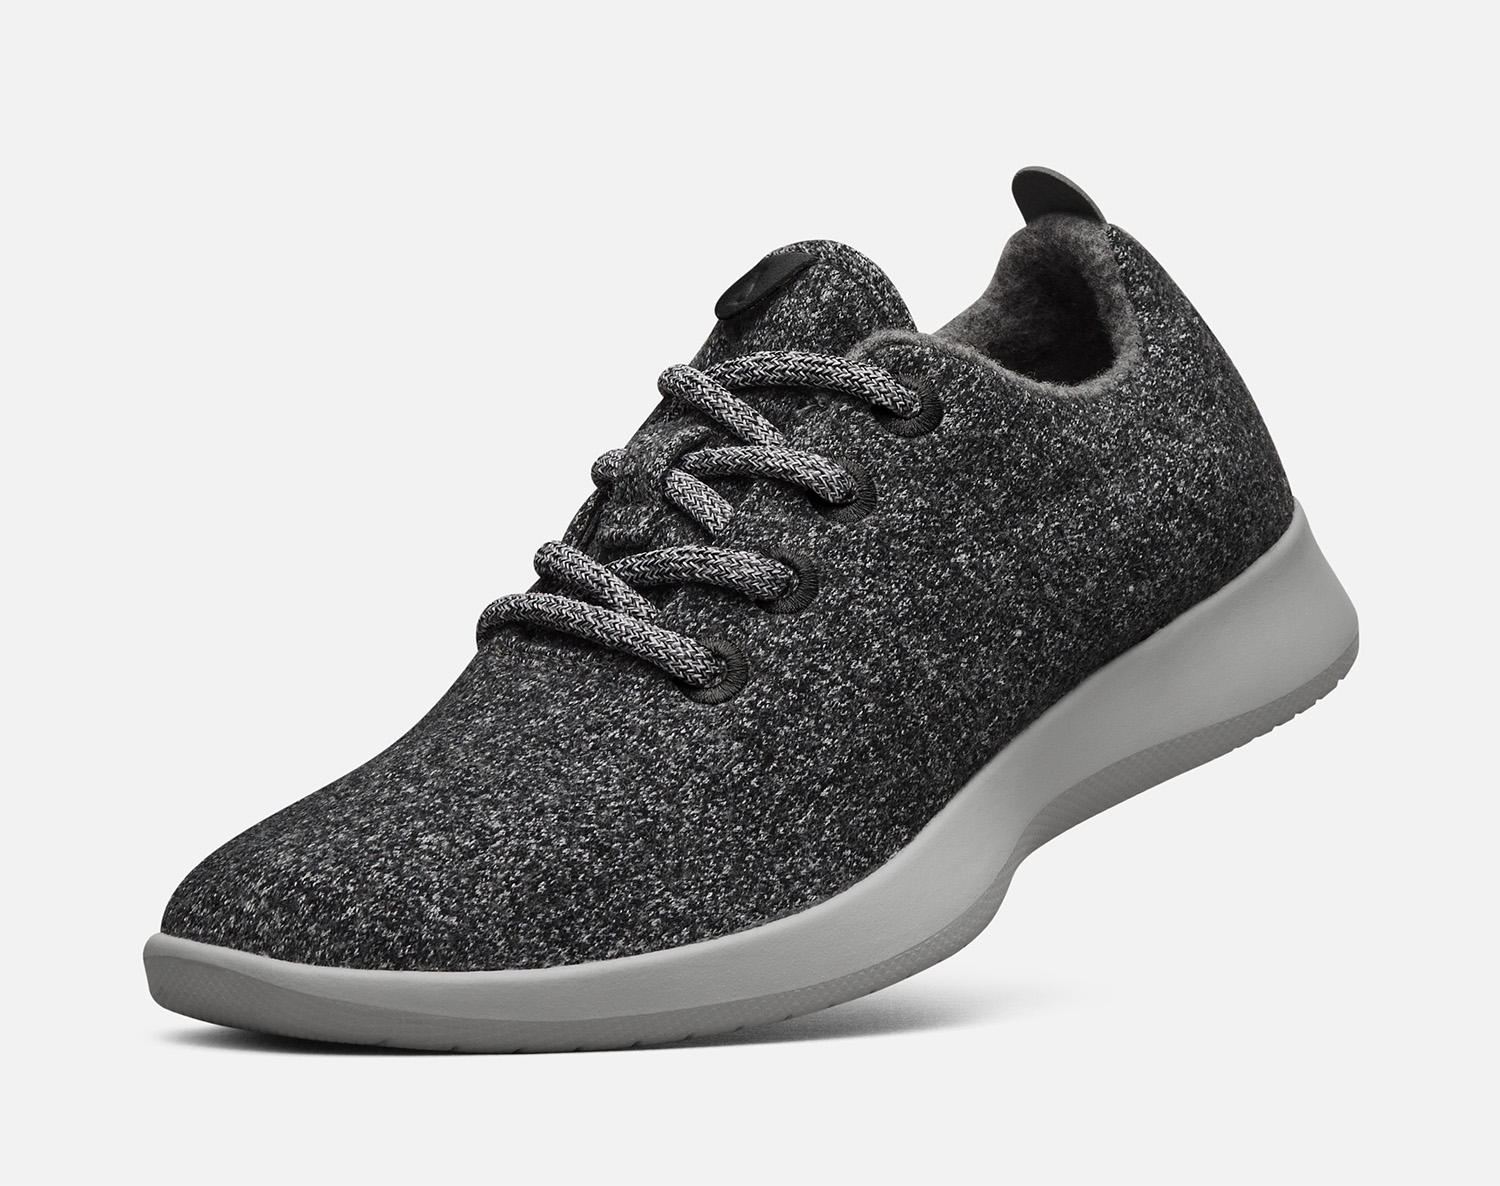 Allbirds plans to expand to new materials with $17.5 million in fresh ...